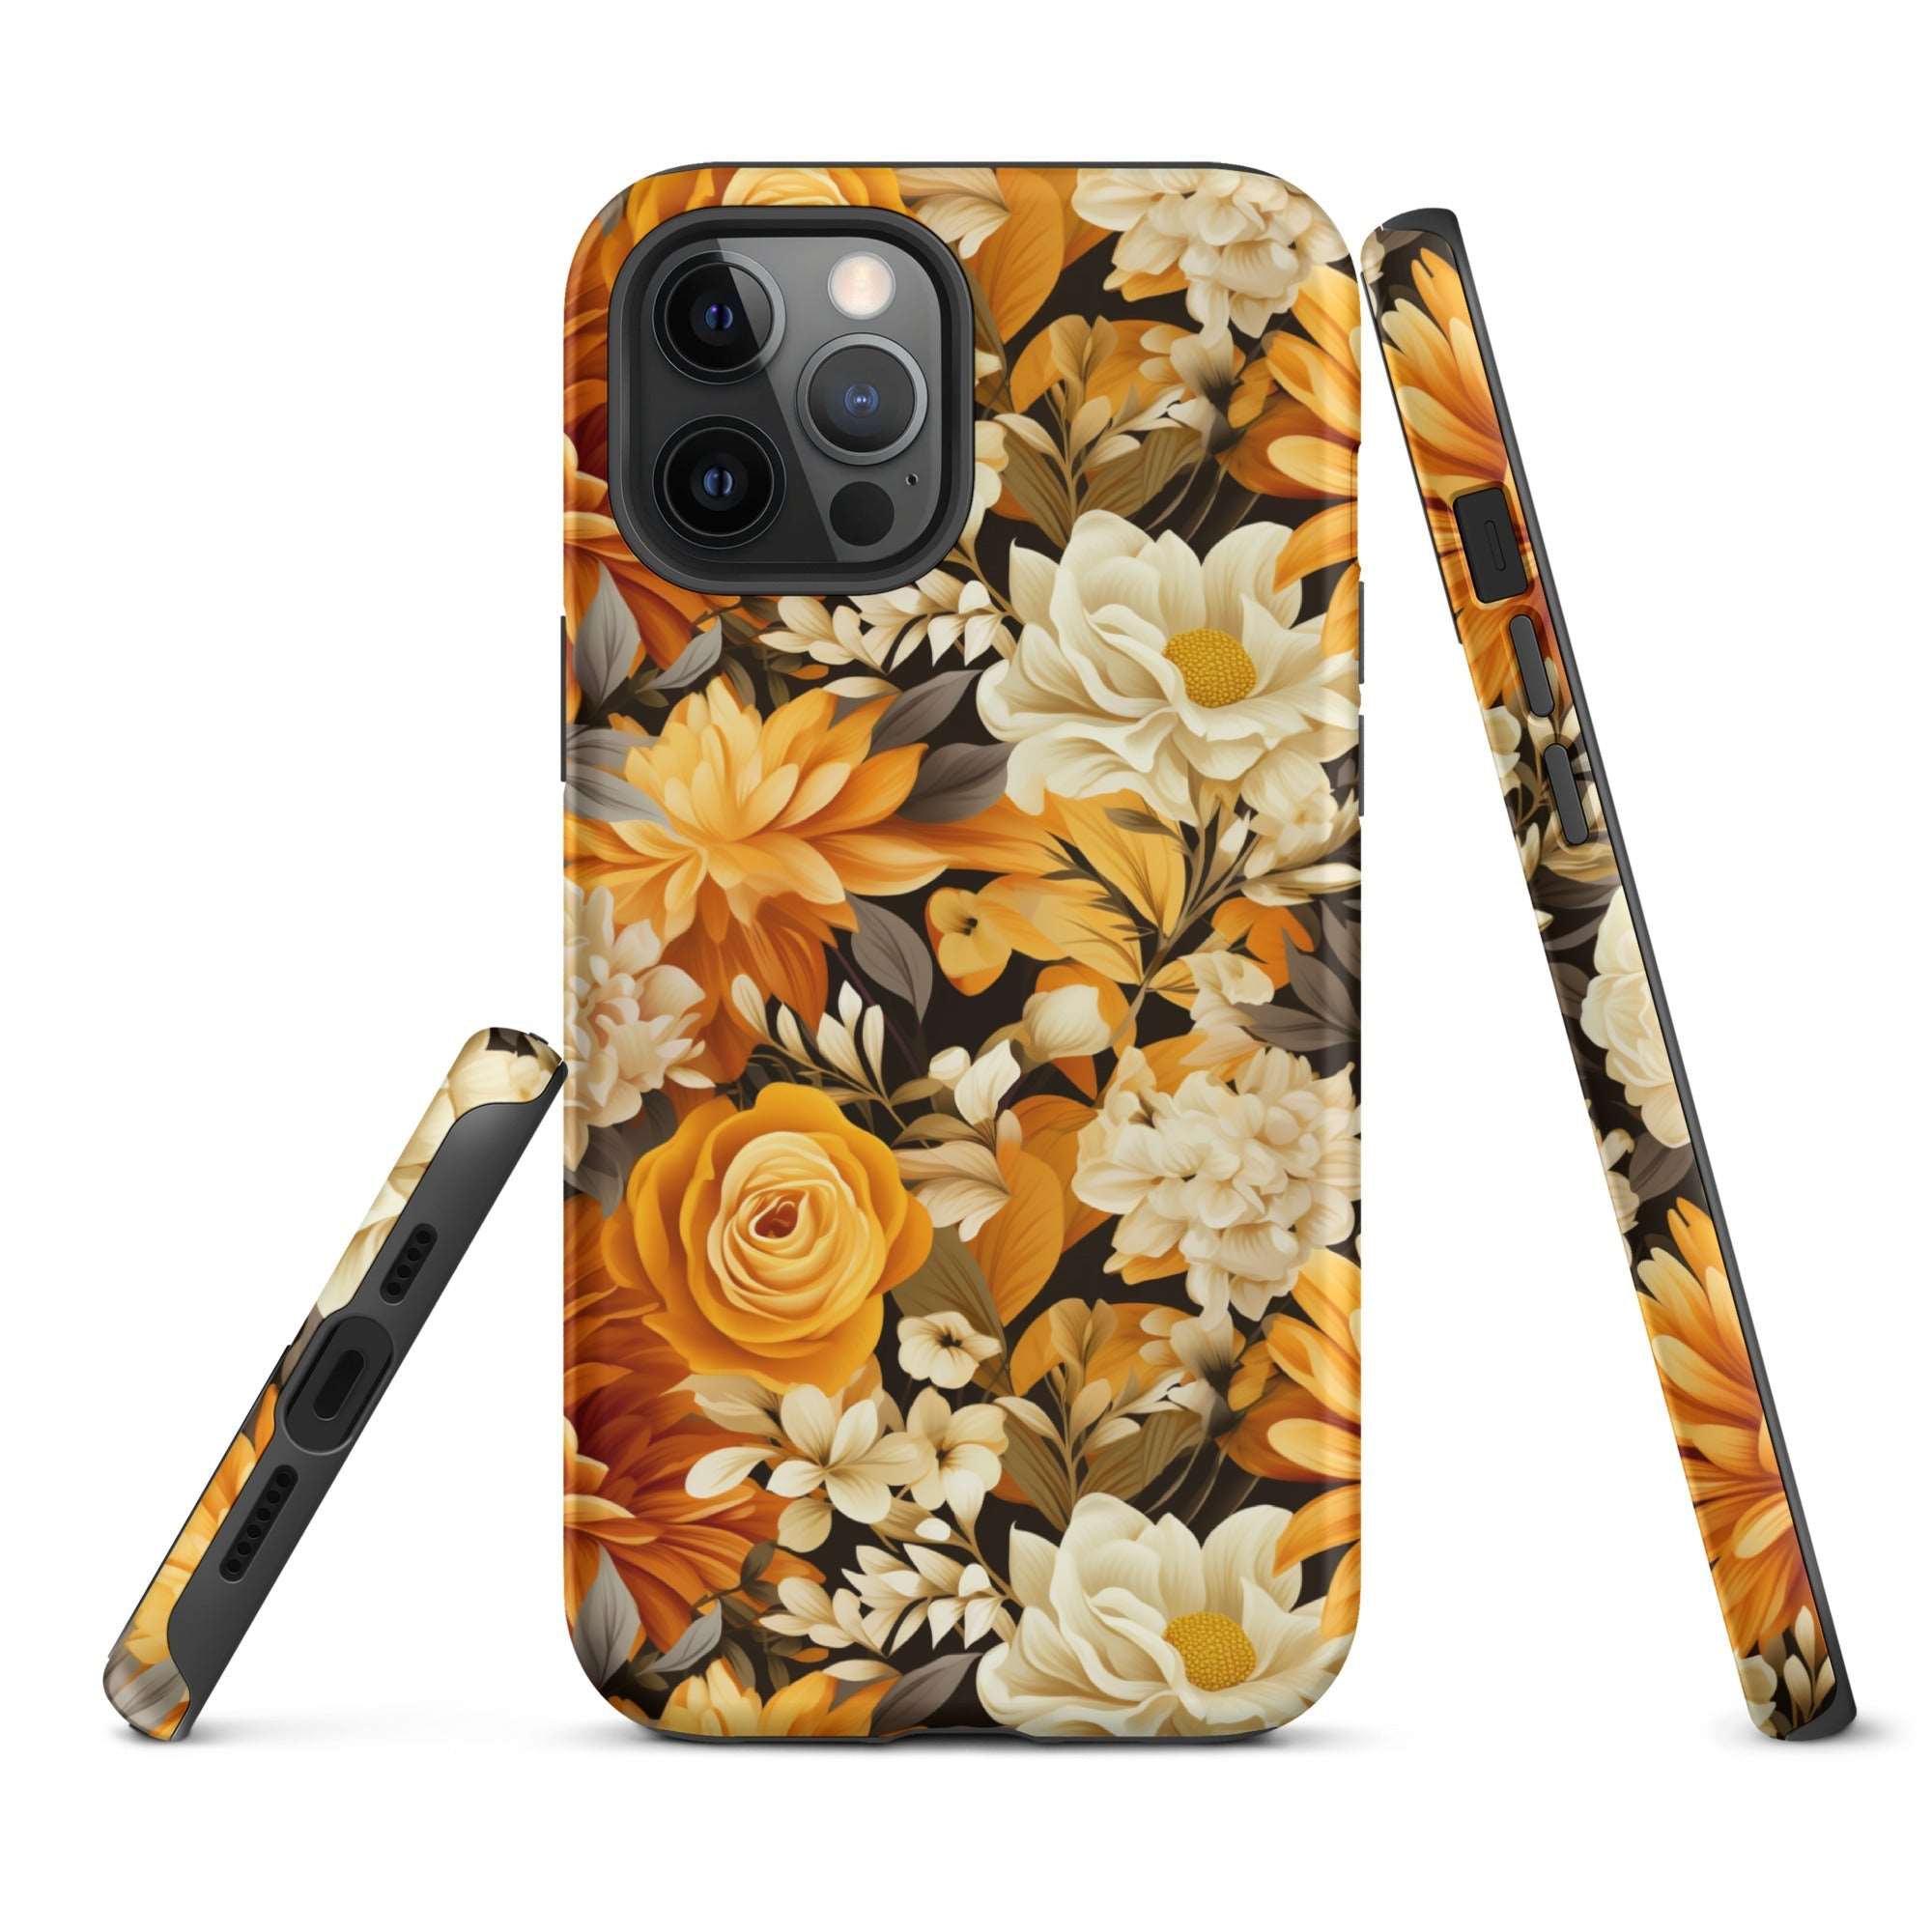 Autumnal Romance - Golden and White Blossoms on Black - iPhone Case - Pattern Symphony